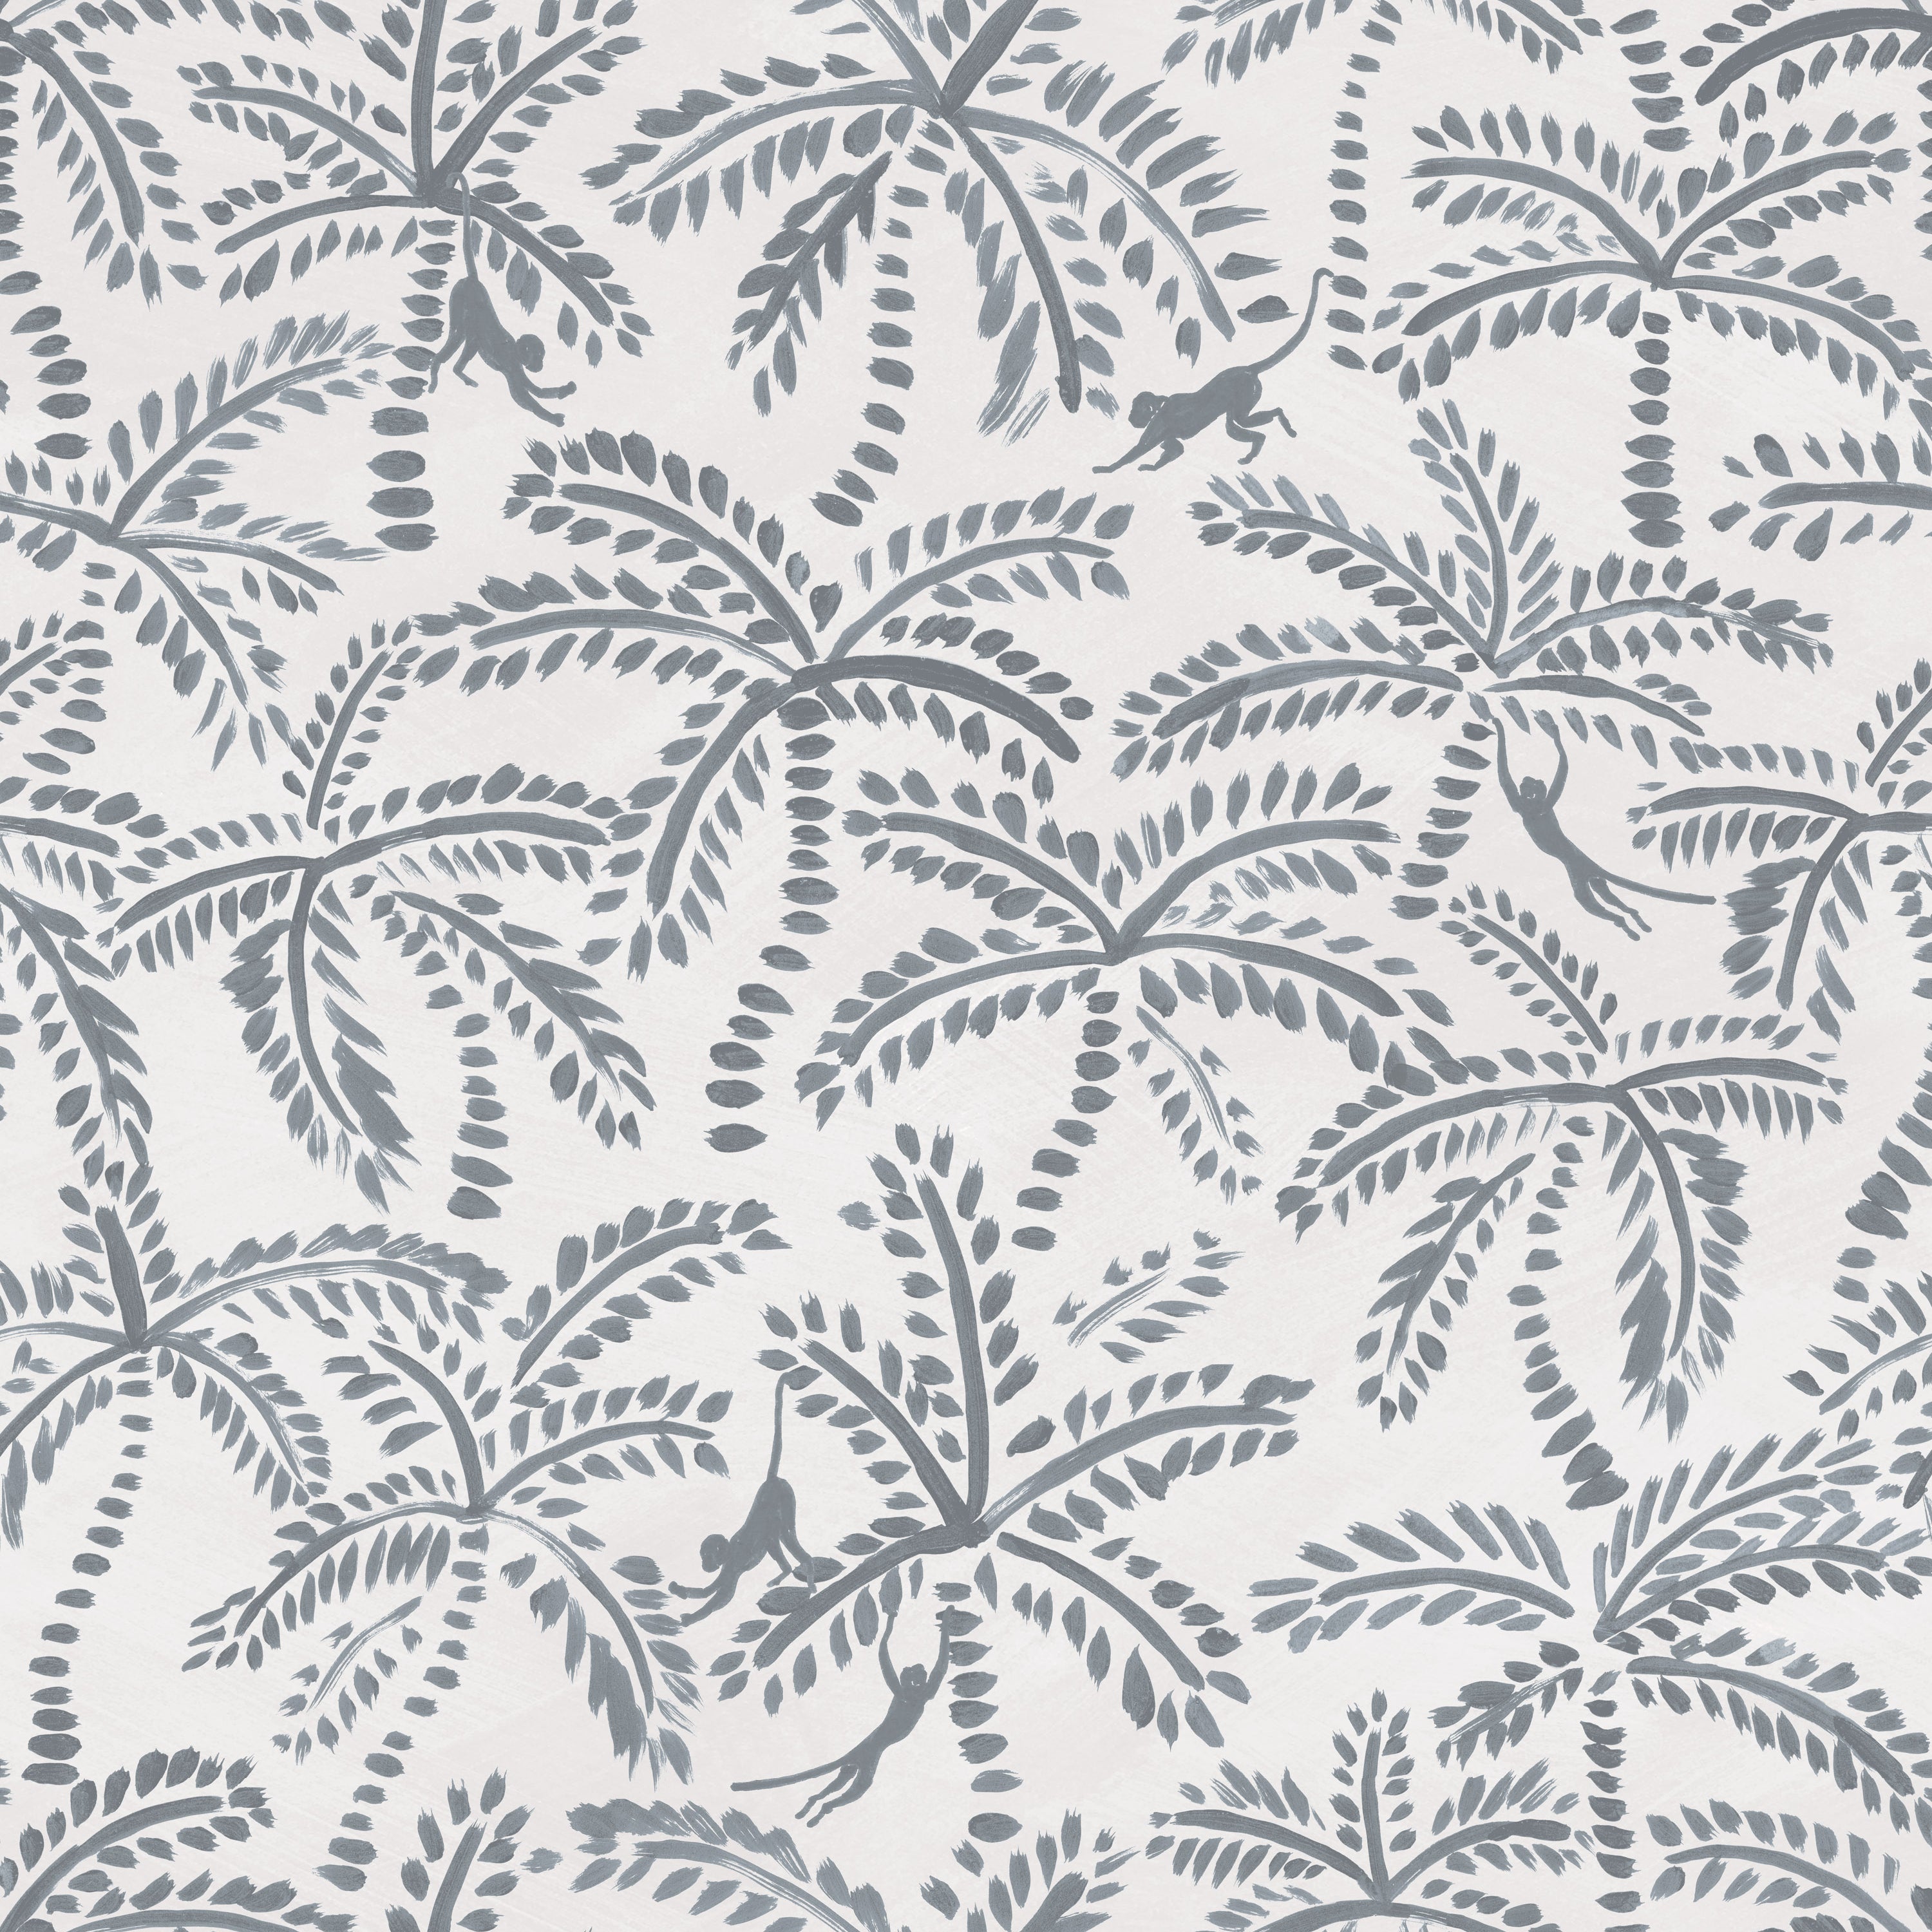 Detail of wallpaper in a playful palm tree and monkey print in gray on a white field.